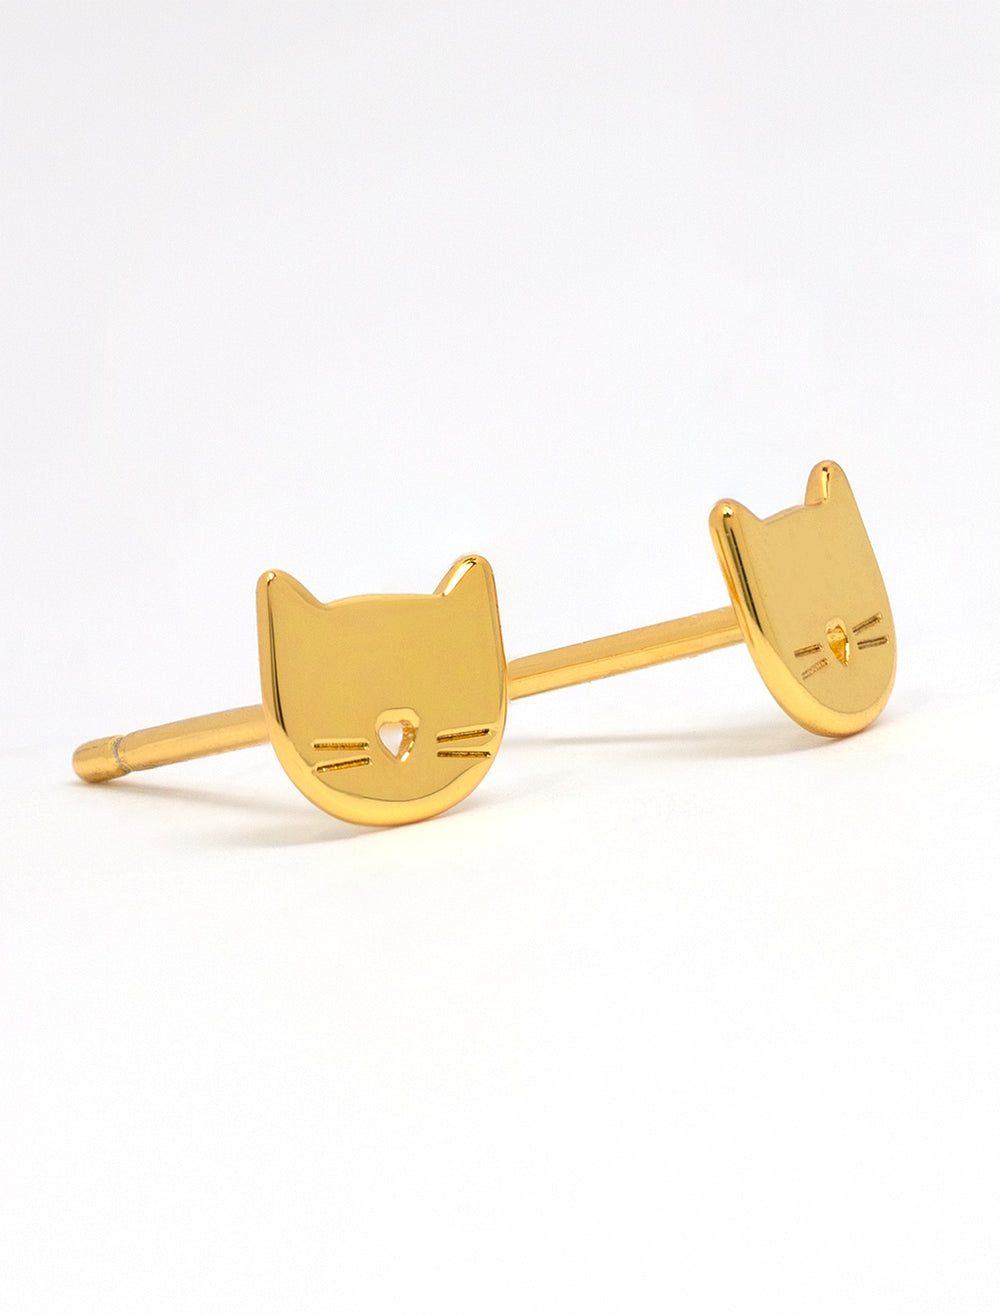 Close-up view of Tai's cat studs in gold.